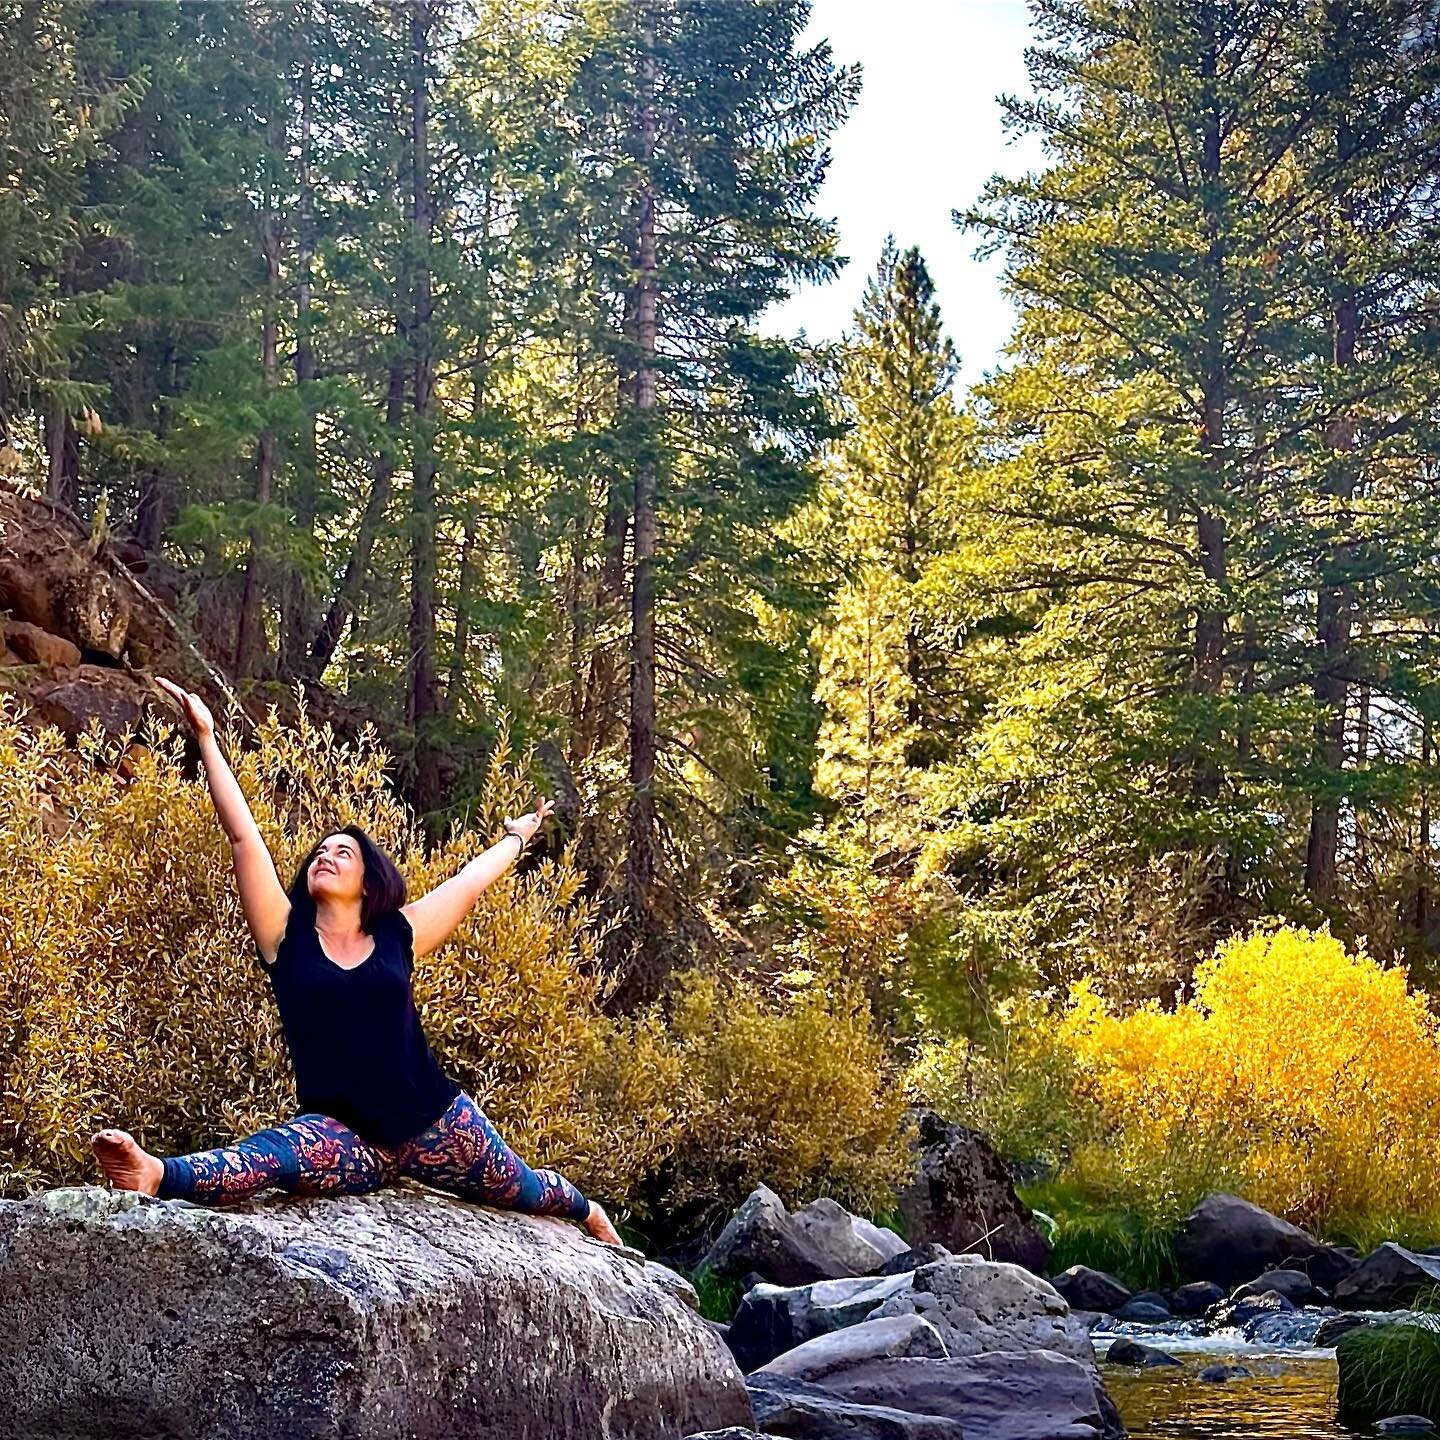 Join us November 11-13 in beautiful northeastern California this fall for a yoga retreat designed to release ~ restore ~ renew!

Spots are limited so each one of you has ample space to explore and restore on 10 acres of gorgeous pine and mixed conife